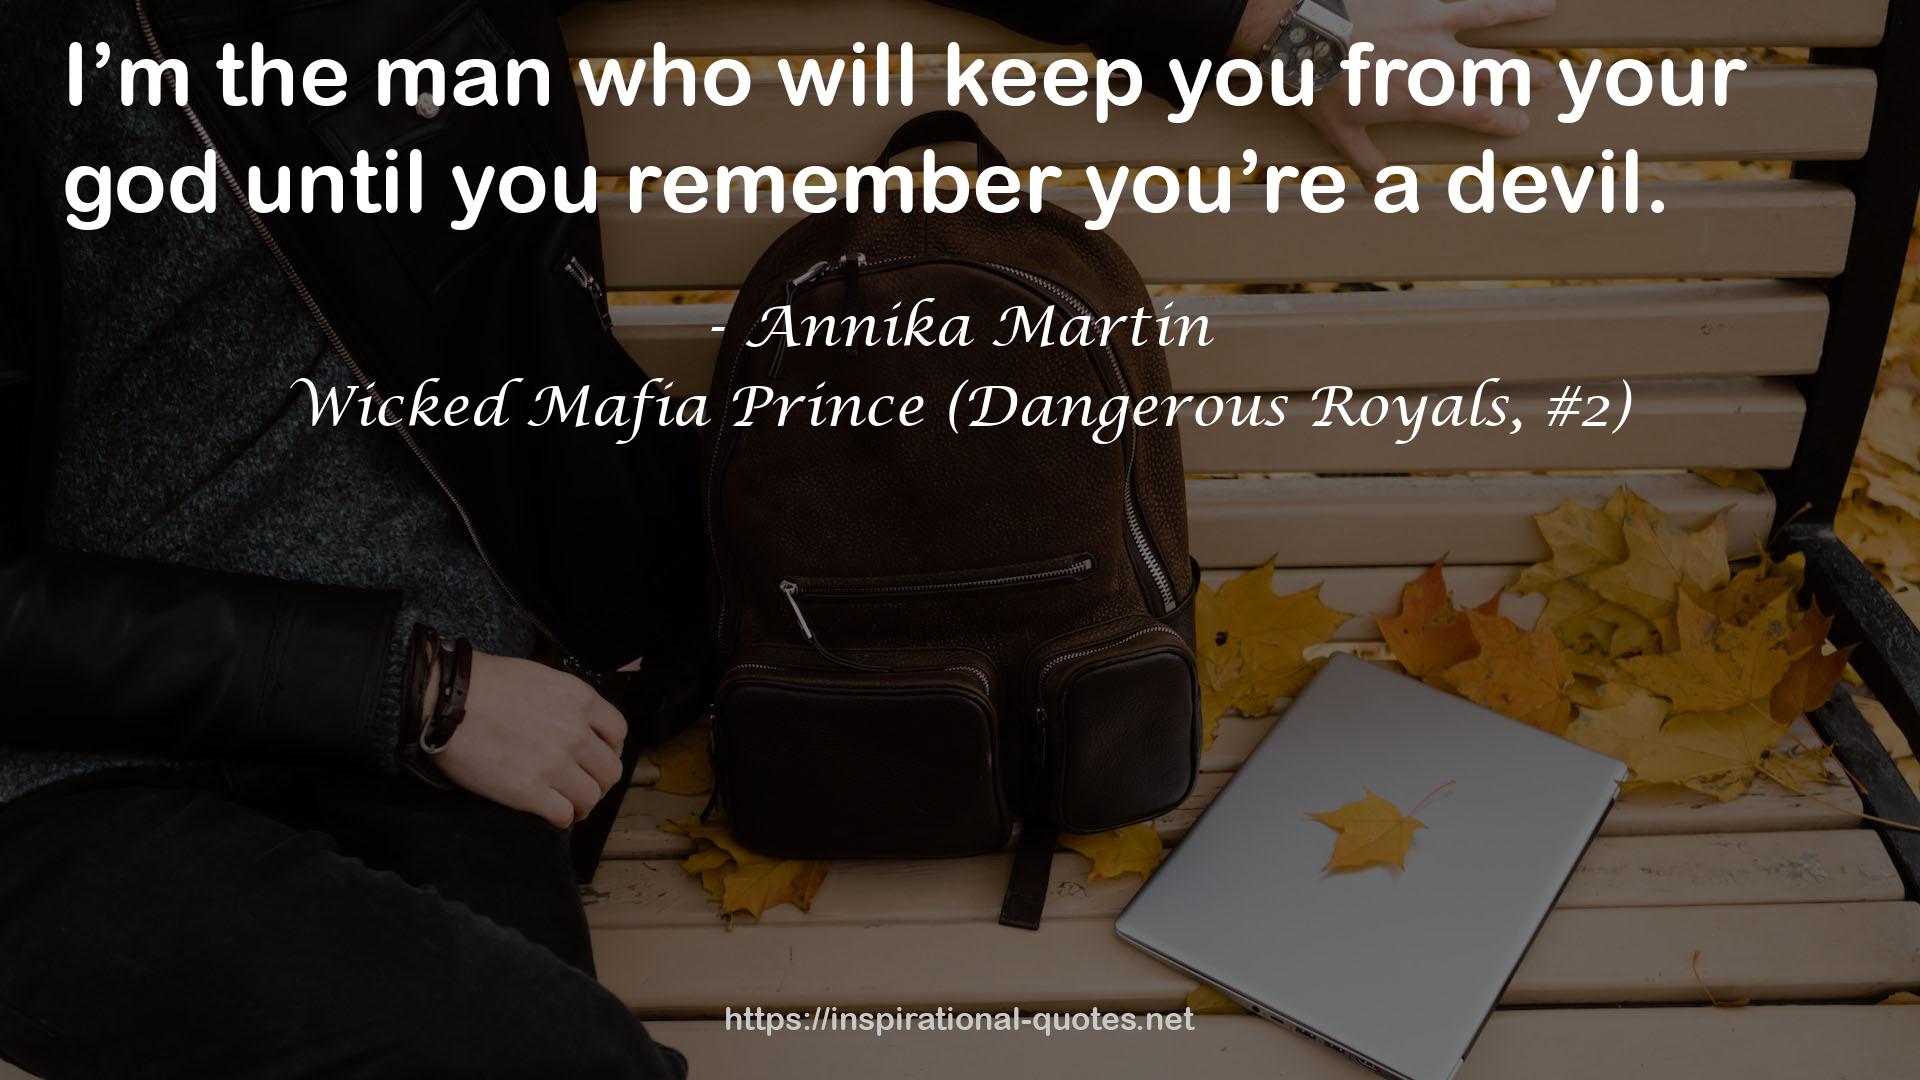 Wicked Mafia Prince (Dangerous Royals, #2) QUOTES